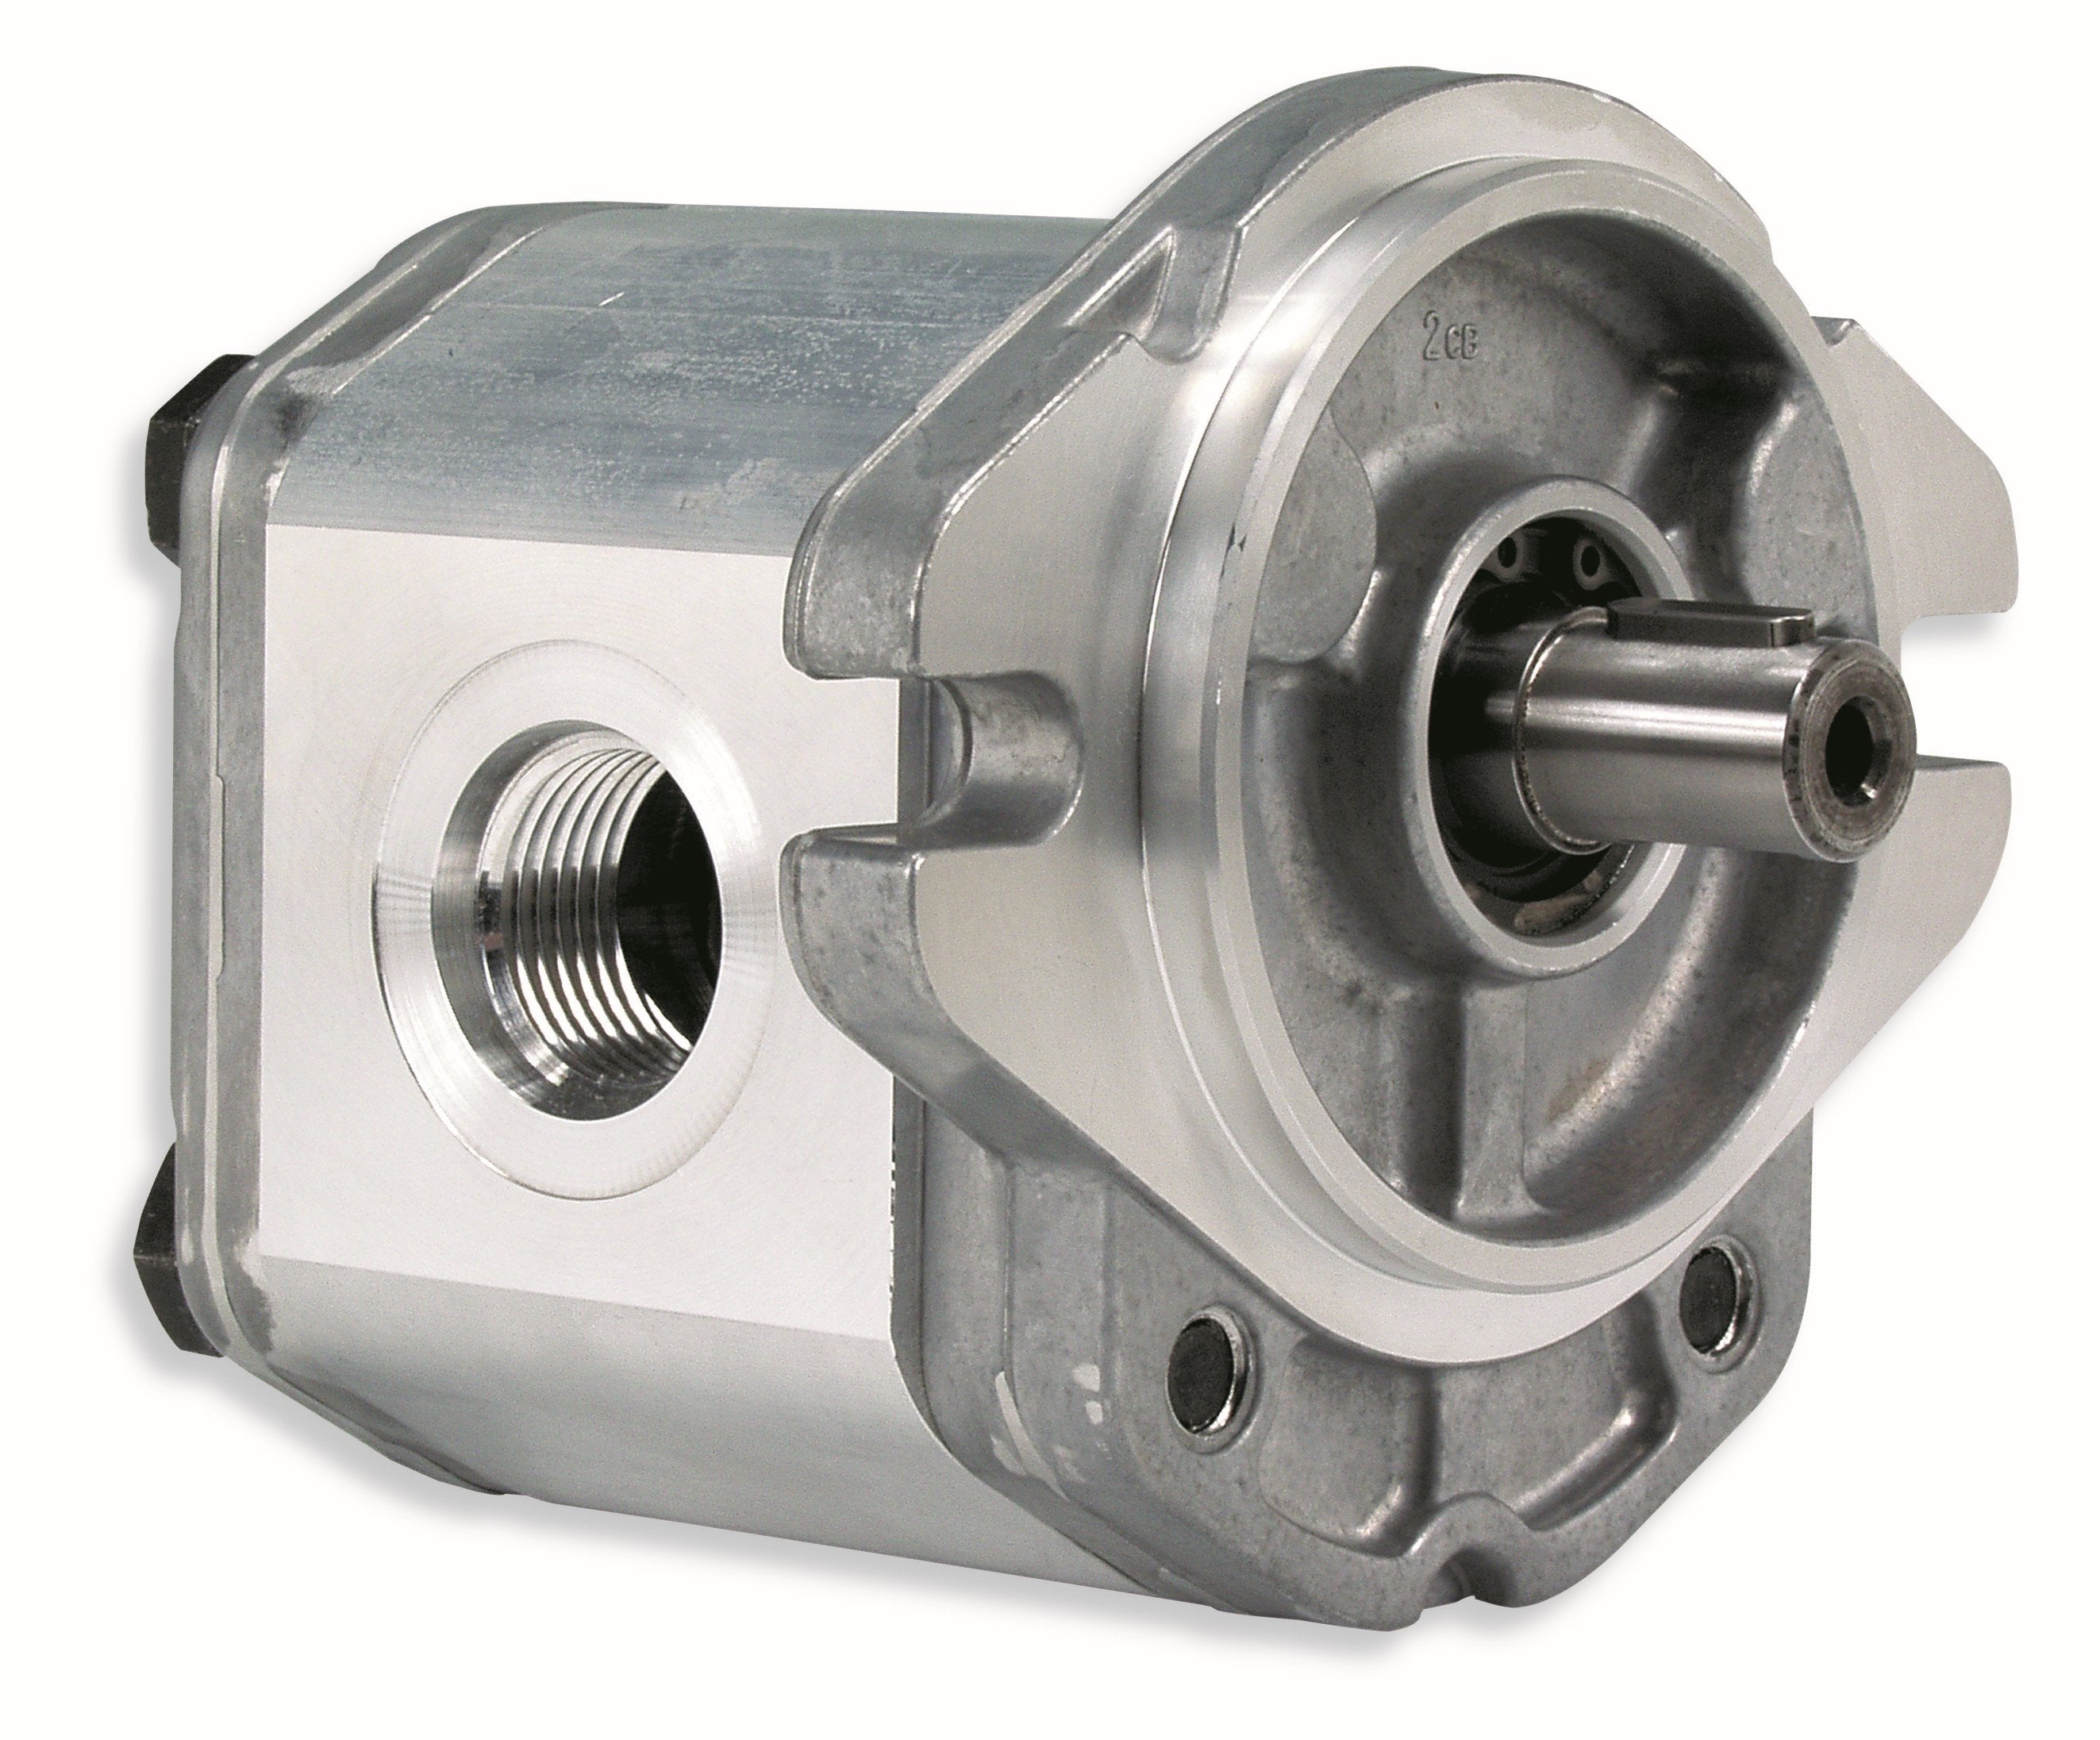 GHM2A-R-34-S1-E2 : Marzocchi Gear Motor, Bidirectional, 23.7cc, 3335psi rated, 2000RPM, 0.75 (3/4") #12 SAE ports, 9T 16/32DP Splined Shaft